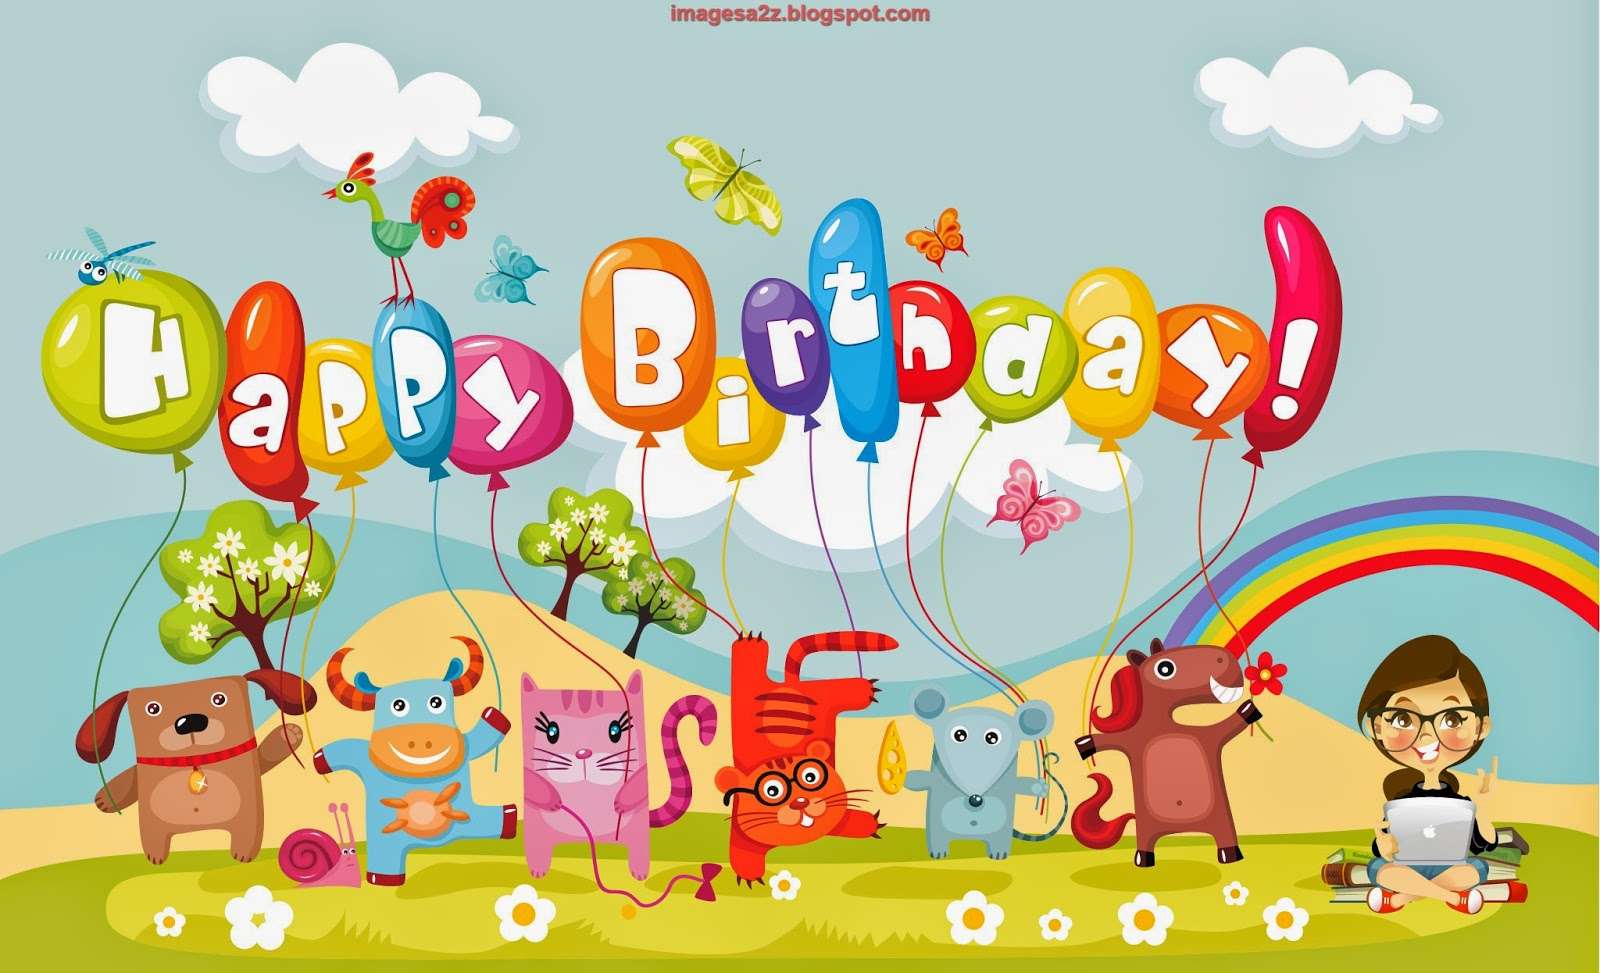 HAPPY BIRTHDAY WISHES FOR KIDS